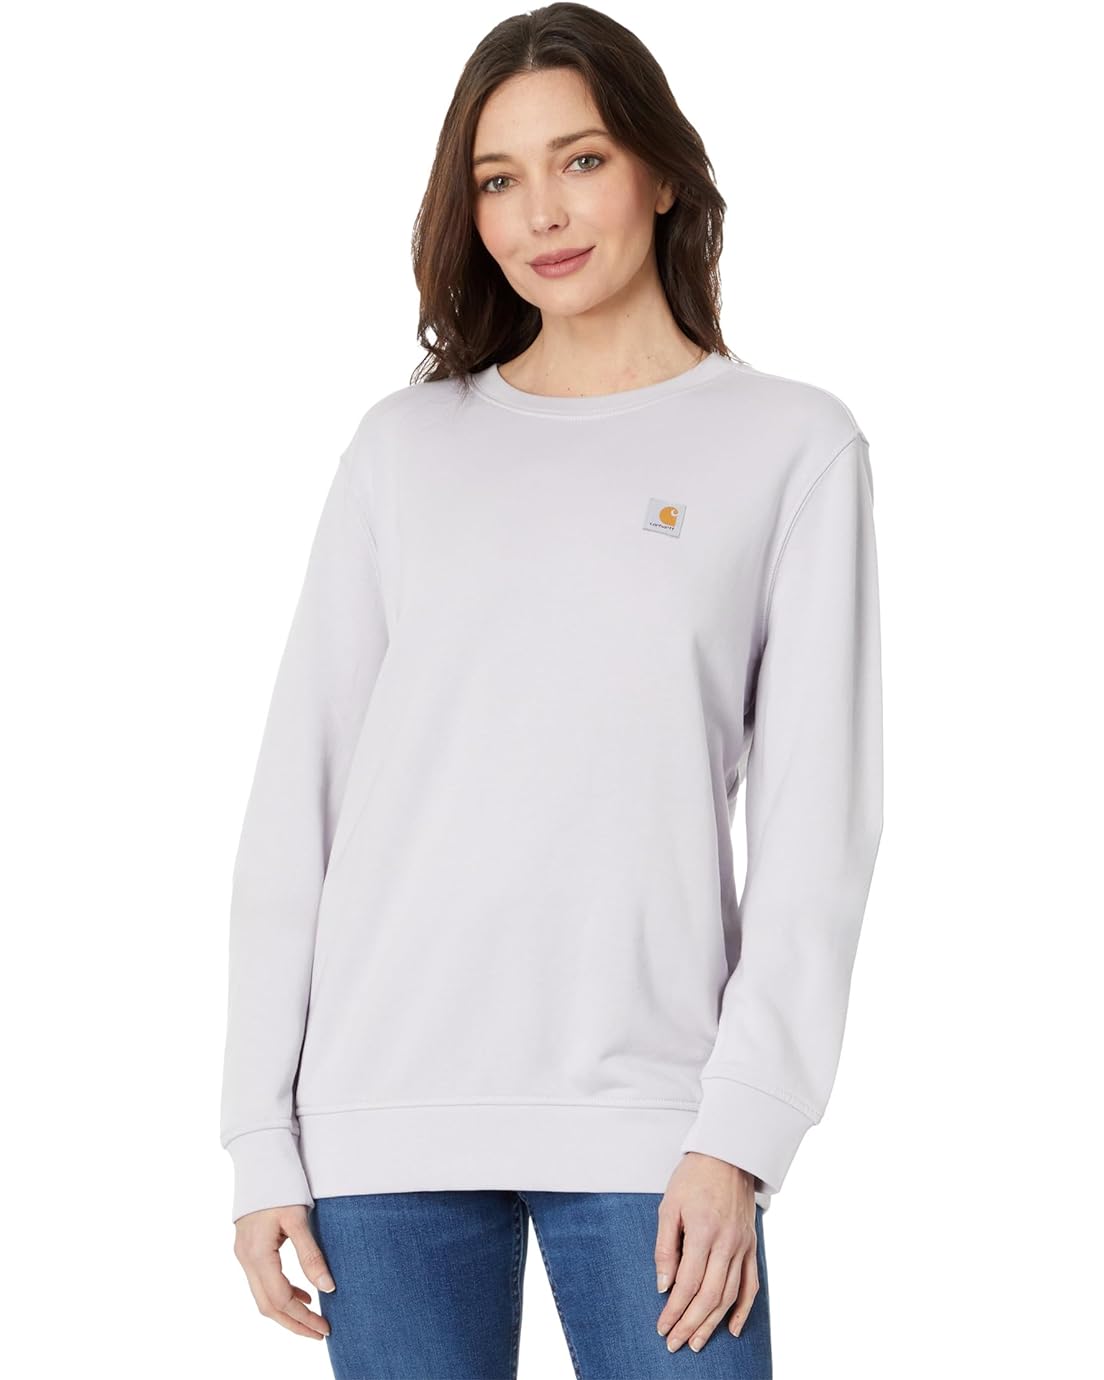 Carhartt Relaxed Fit Midweight French Terry Crew Neck Sweatshirt